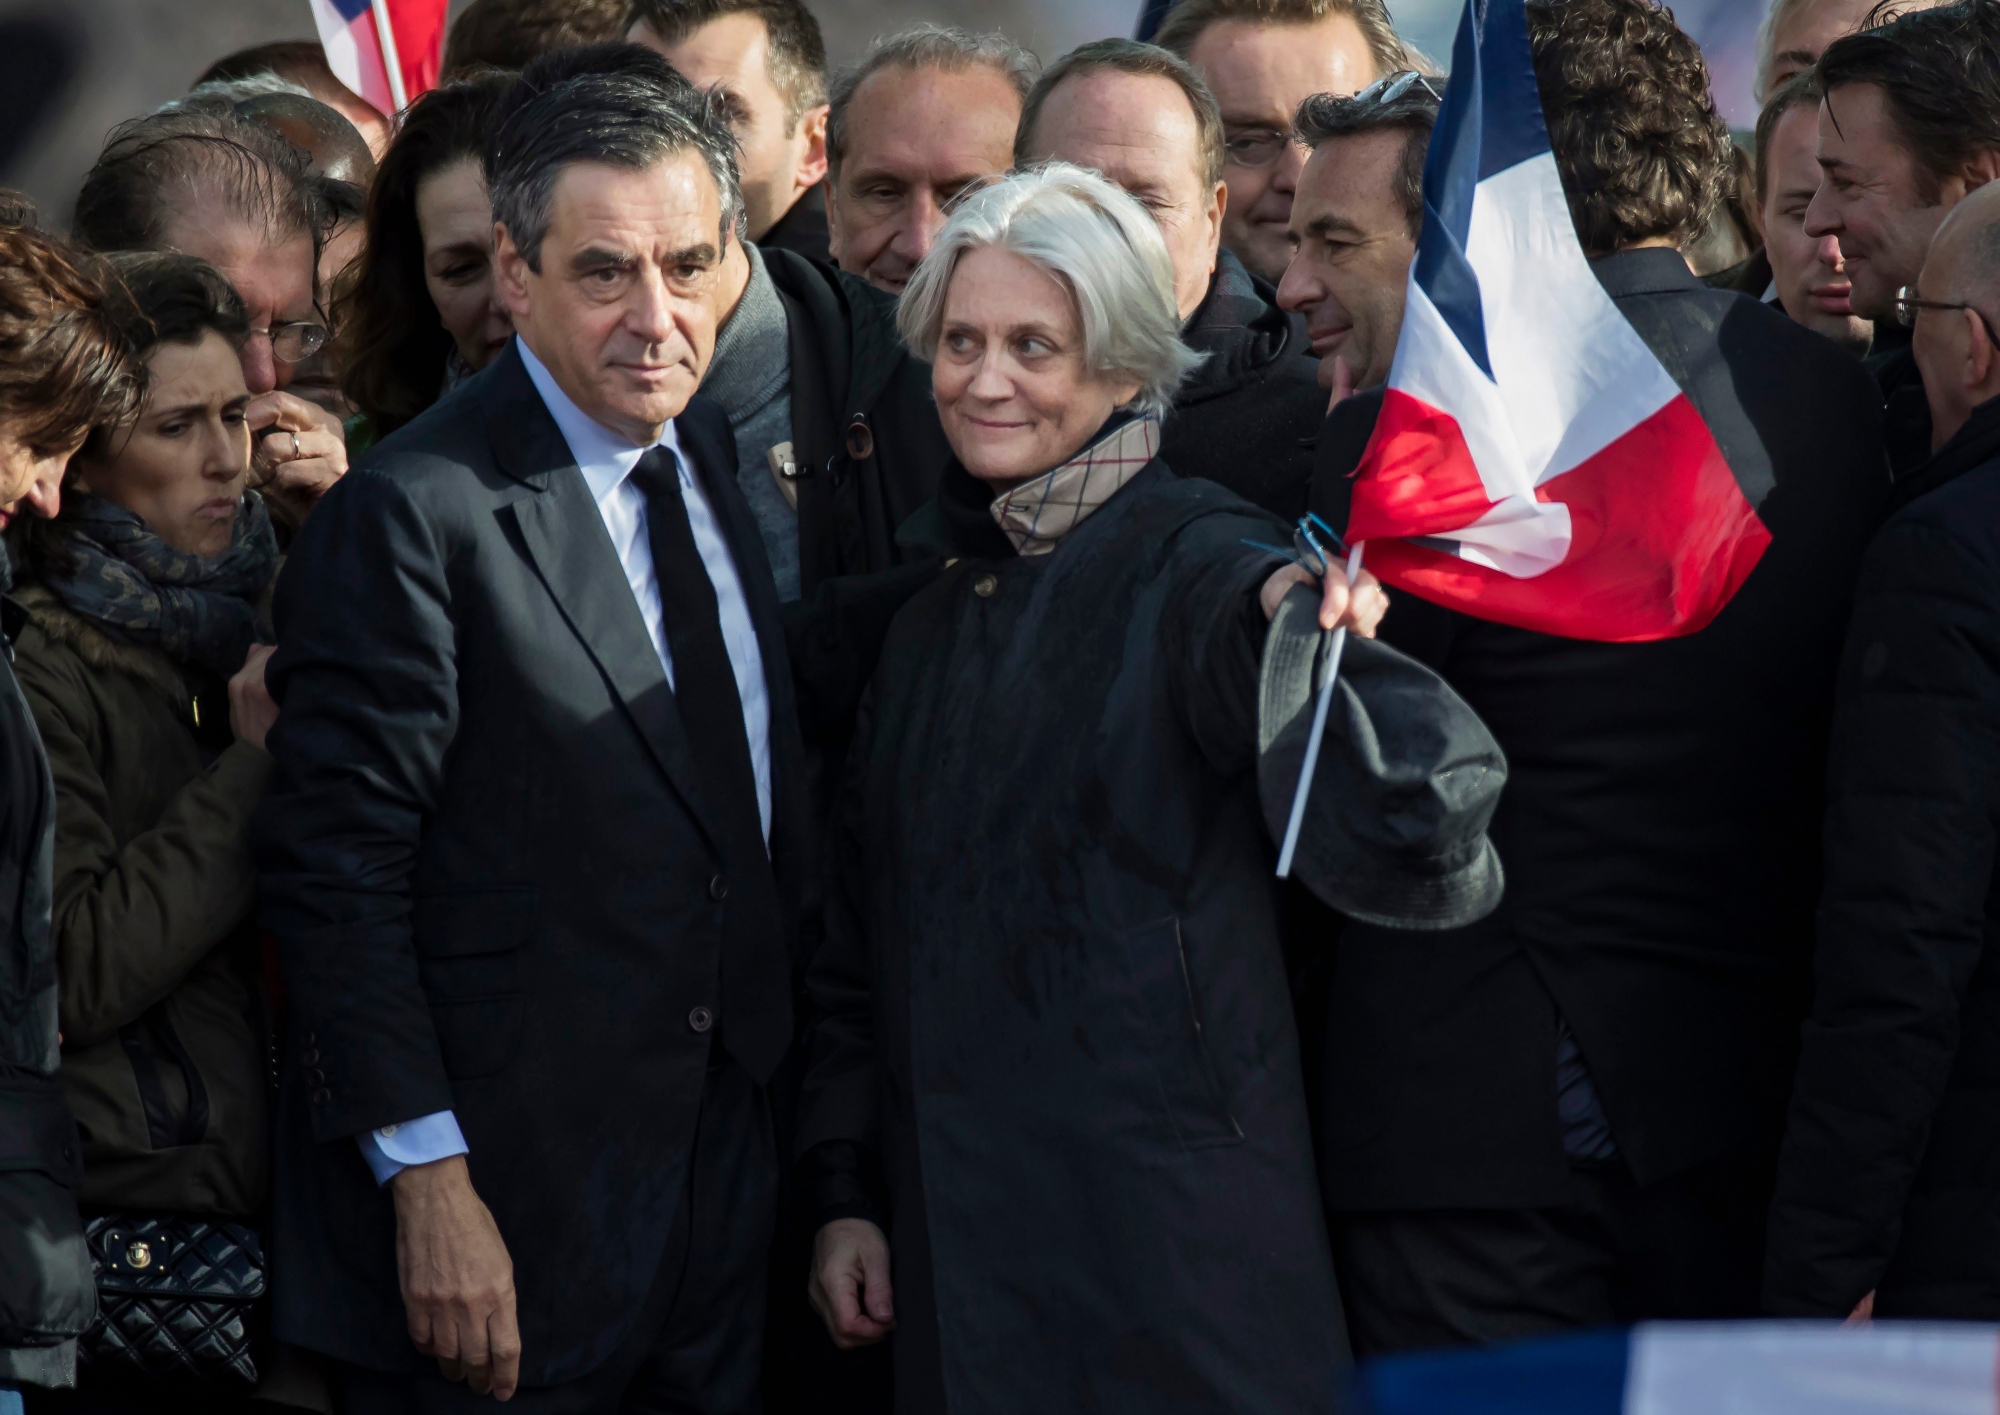 epa07522651 (FILE) 'Les Republicains' party candidate for the 2017 French presidential elections, Francois Fillon (L) flanked by his wife Penelope (R) during a meeting organized to support him on the Place du Trocadero in Paris, France, 05 March 2017 (reissued 23 April 2019). According to media reports, Fillon is to face trial against over alleged misuse of public money. Fillon is accused of paying his wife as a co-worker, without her having worked for it.  EPA/IAN LANGSDON (FILE) FRANCE FILLON TRIAL